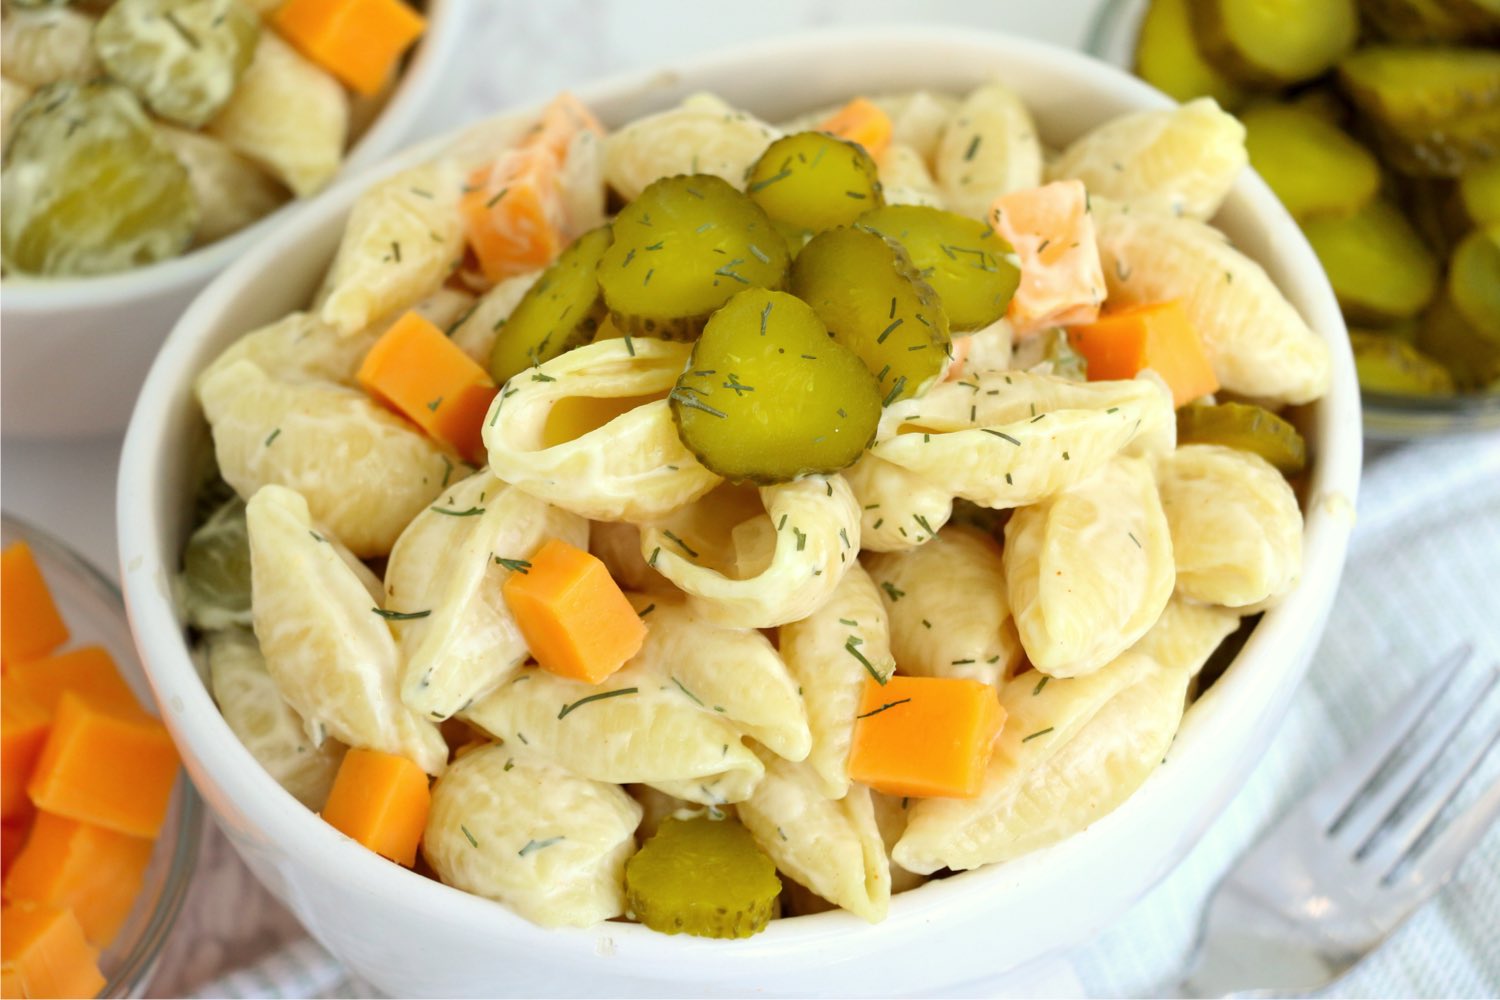 bowl of pasta salad with sliced pickles on top